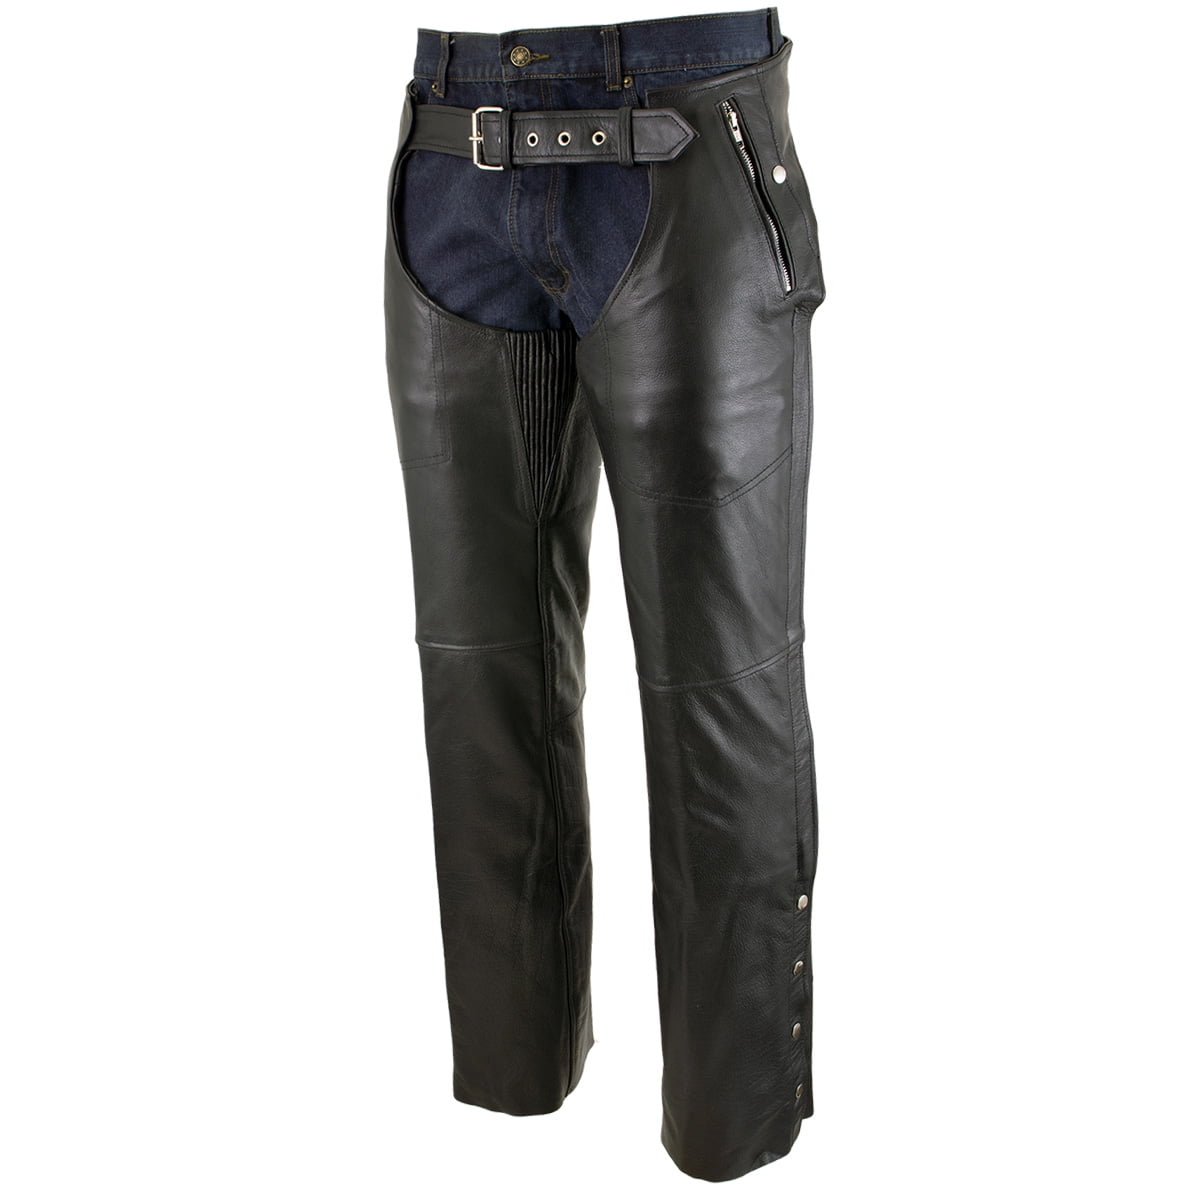 Black Solid Genuine Leather Motorcycle Riding Chaps with Full Lining Adjustable 